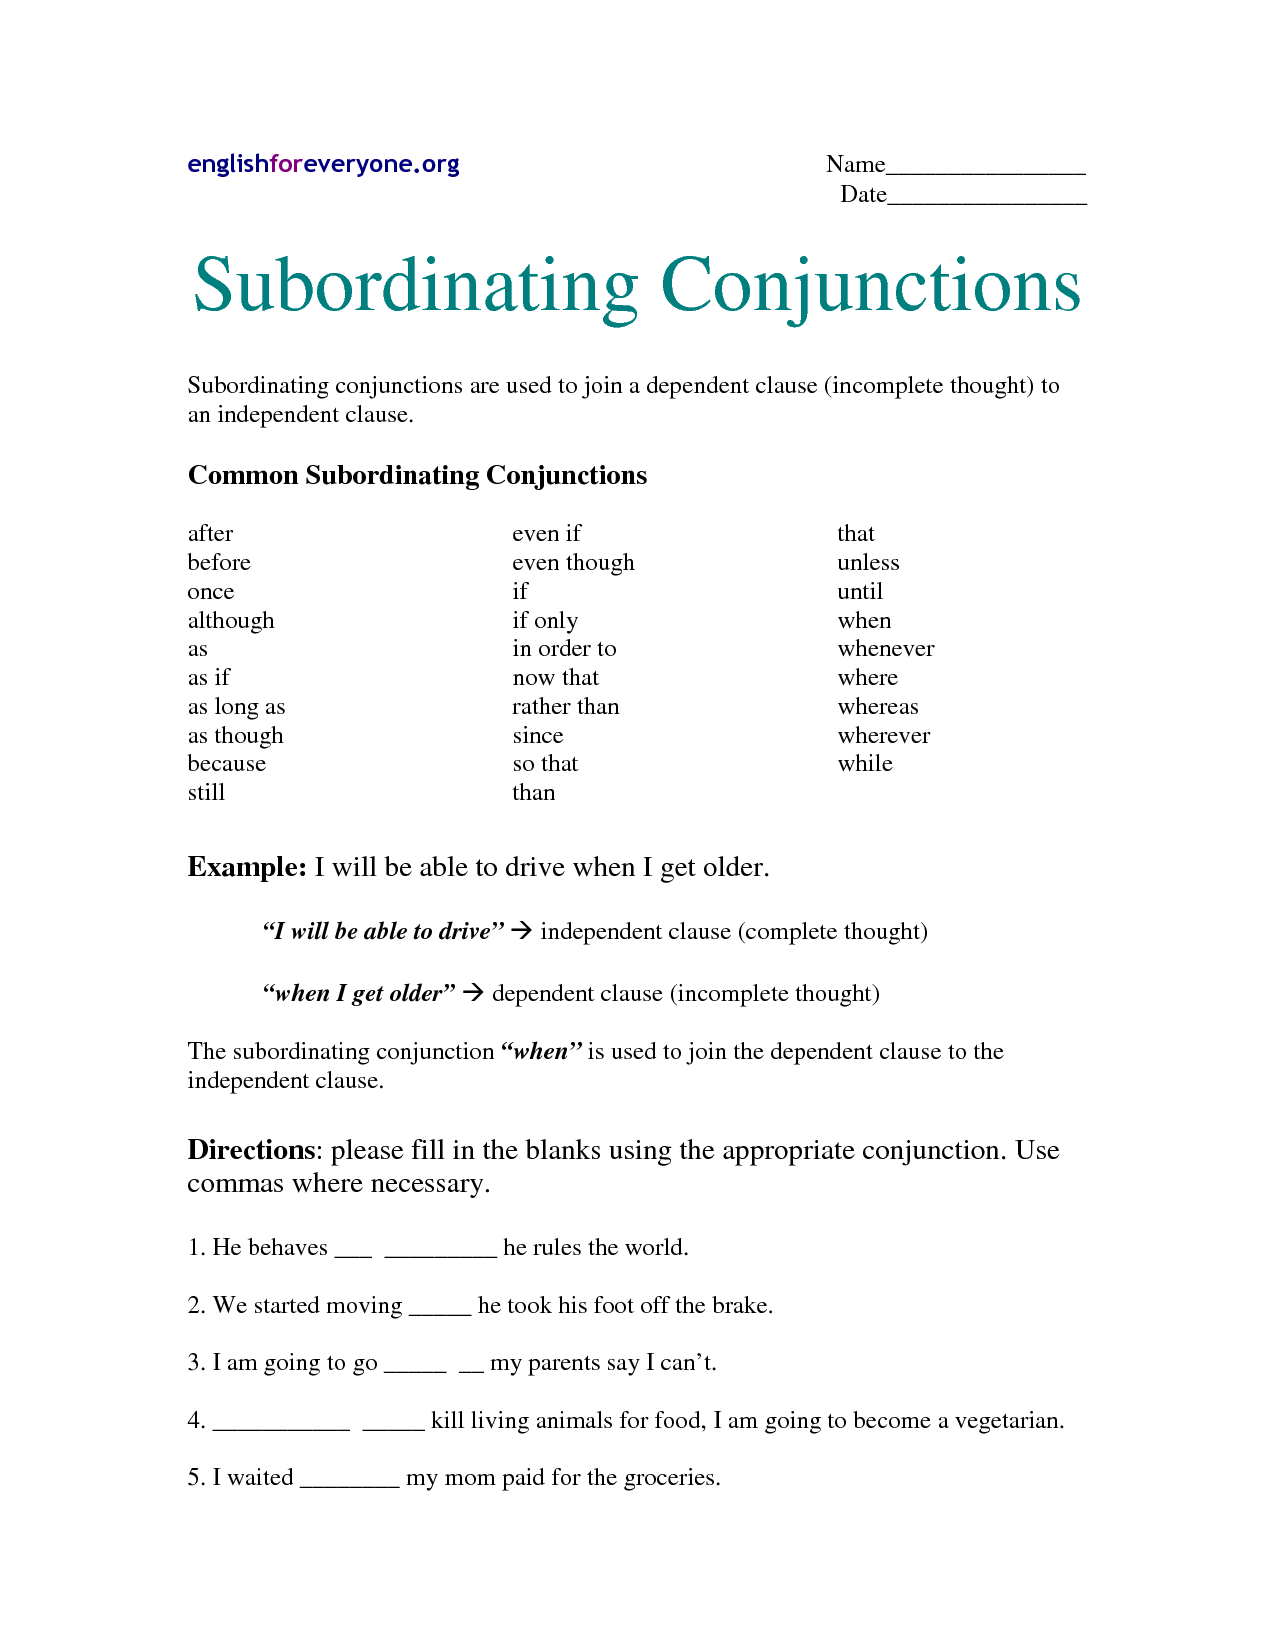 Subordinating Conjunctions Worksheets For High School